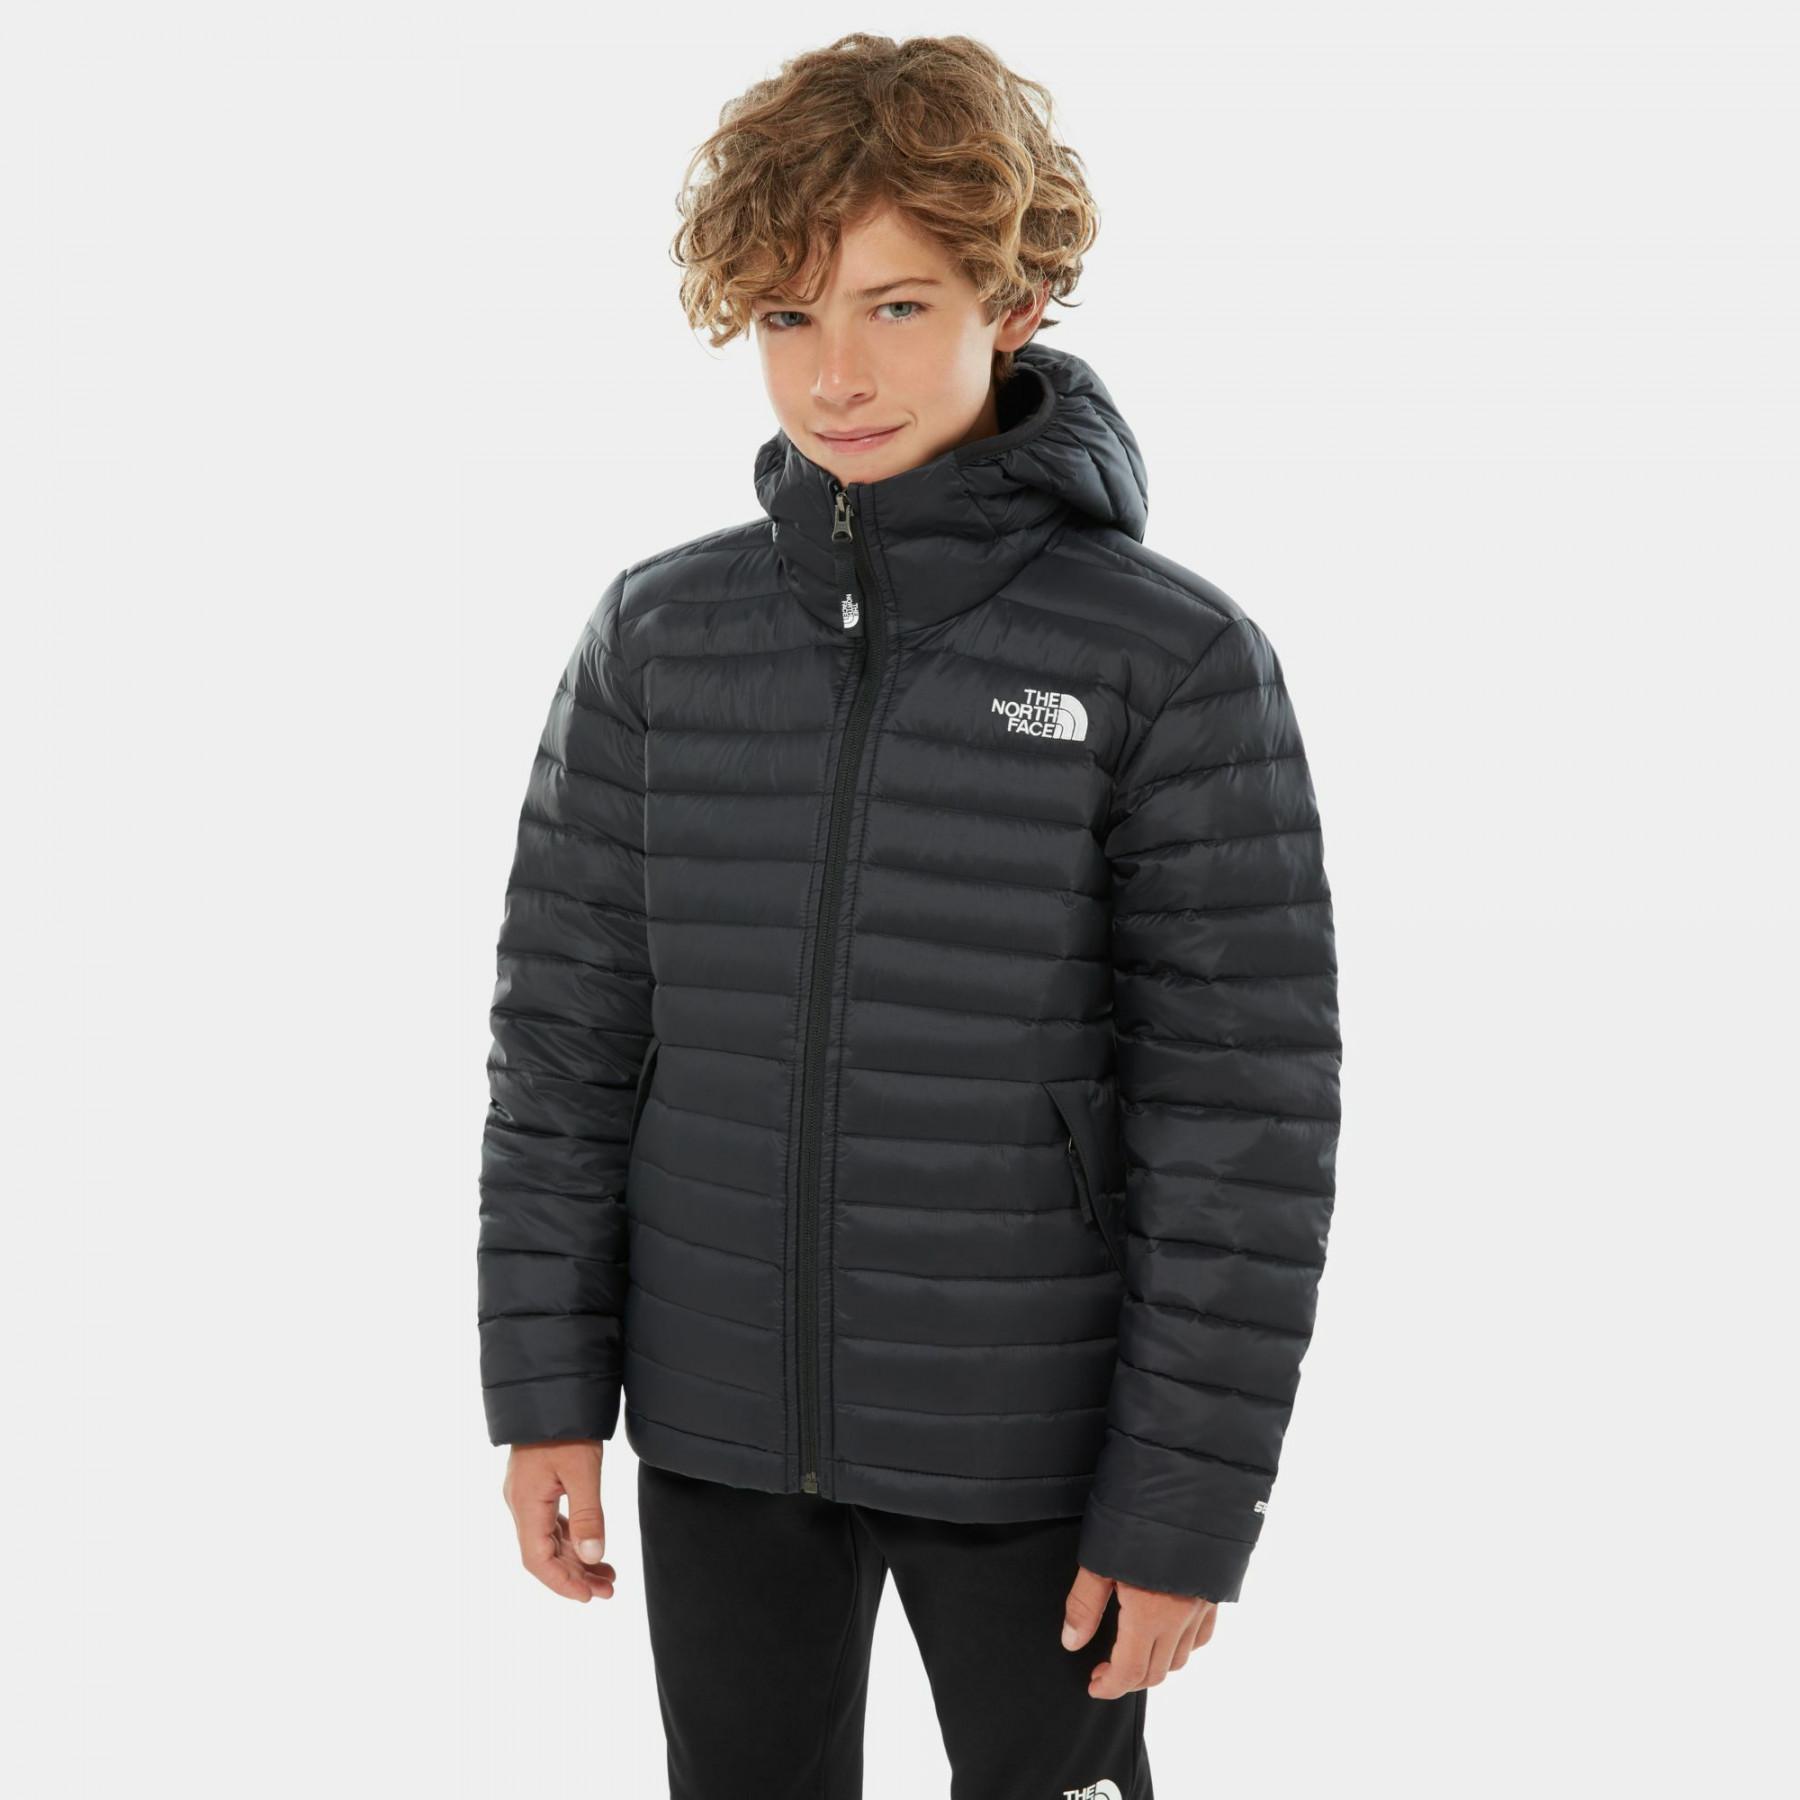 Junior Hooded Jacket The North Face 